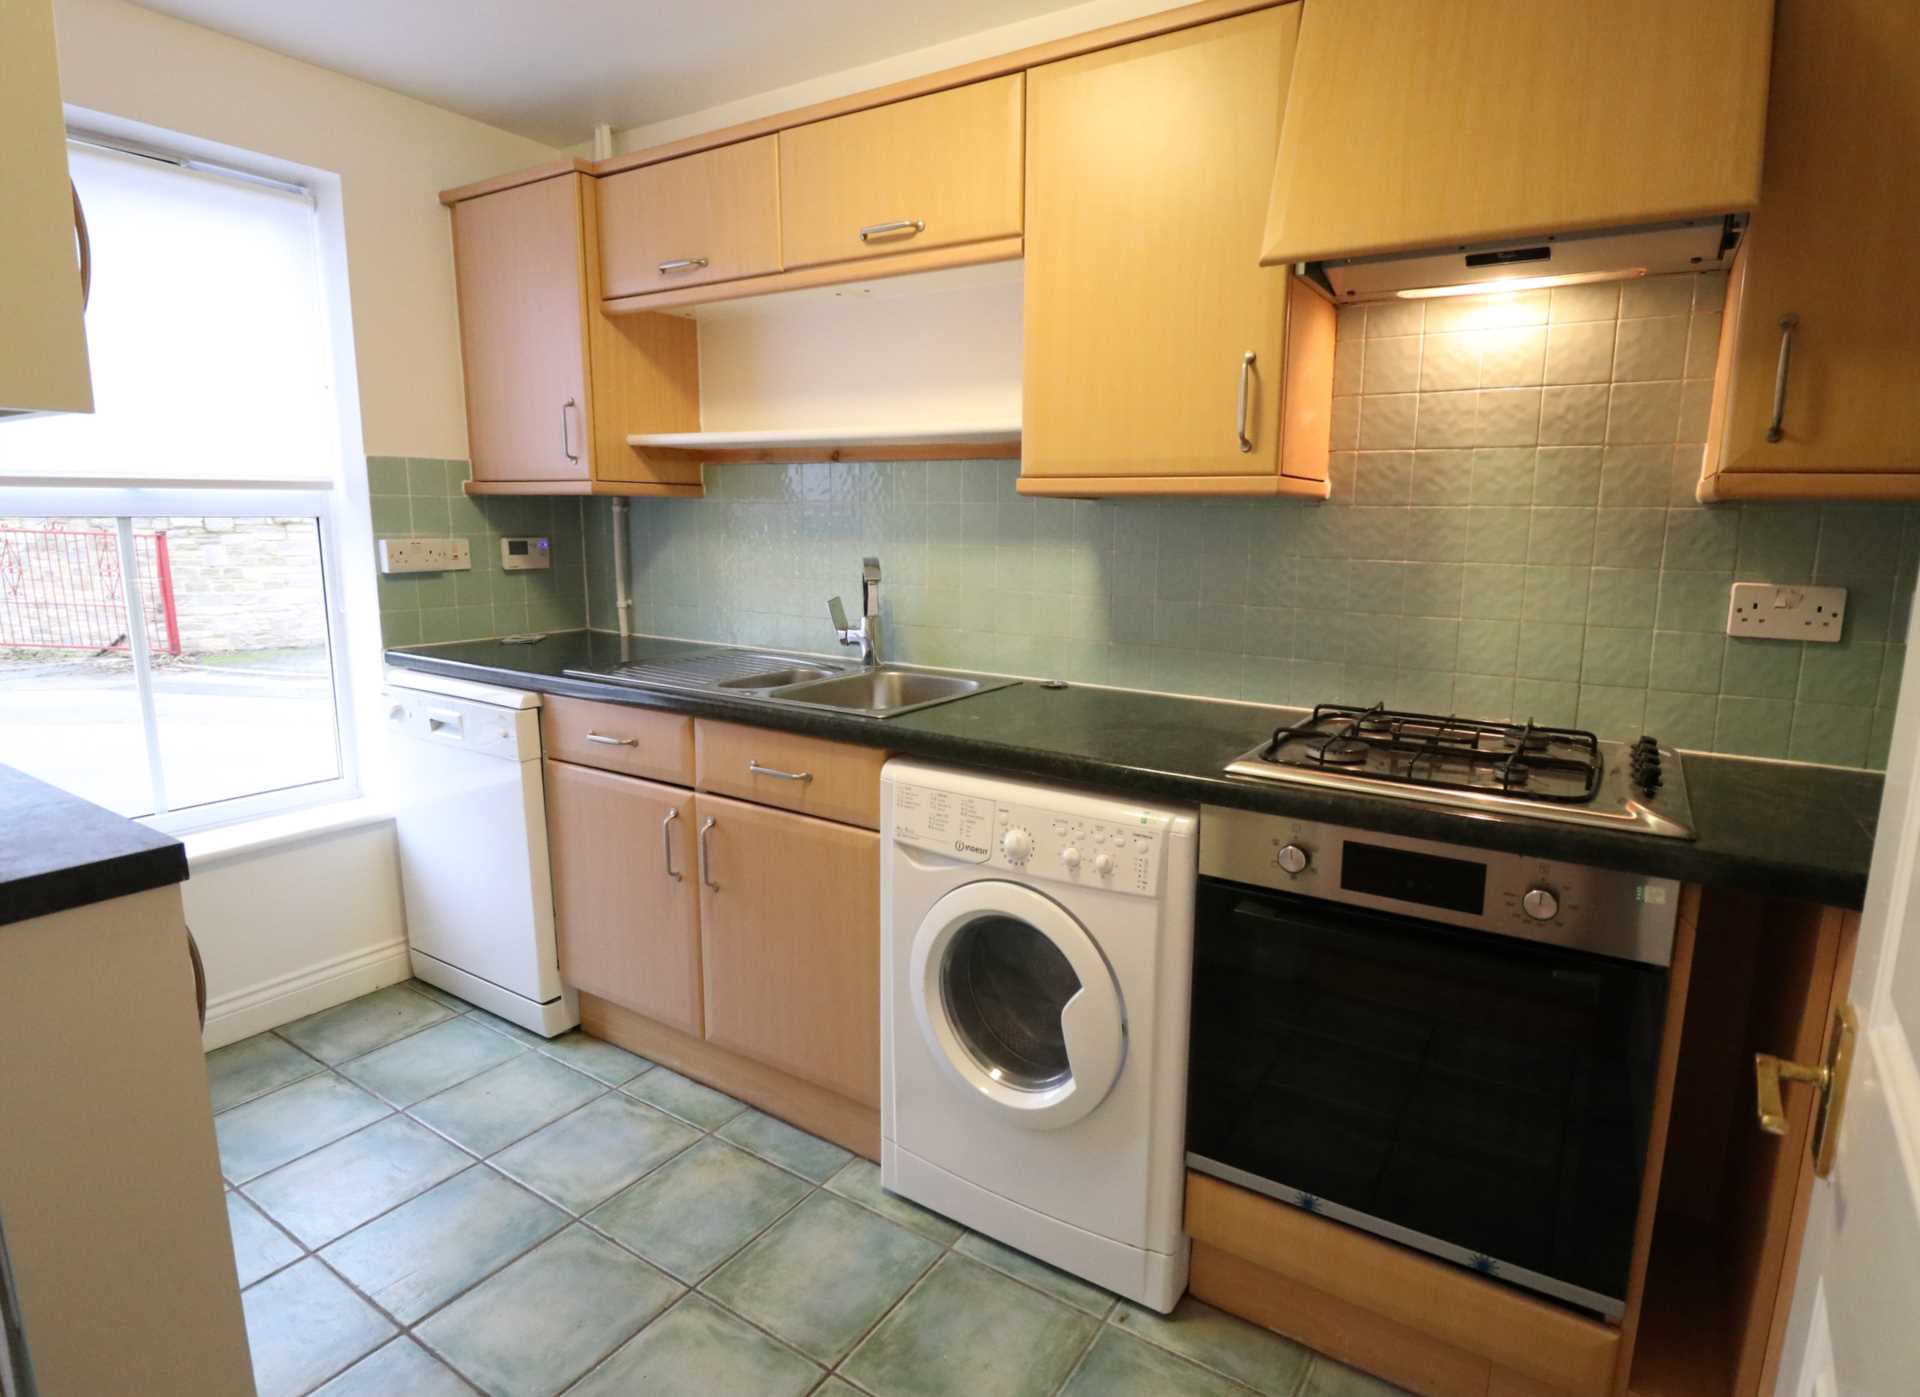 3 bed End Terraced House for rent in Oxford. From Abbey Group Property Management Ltd